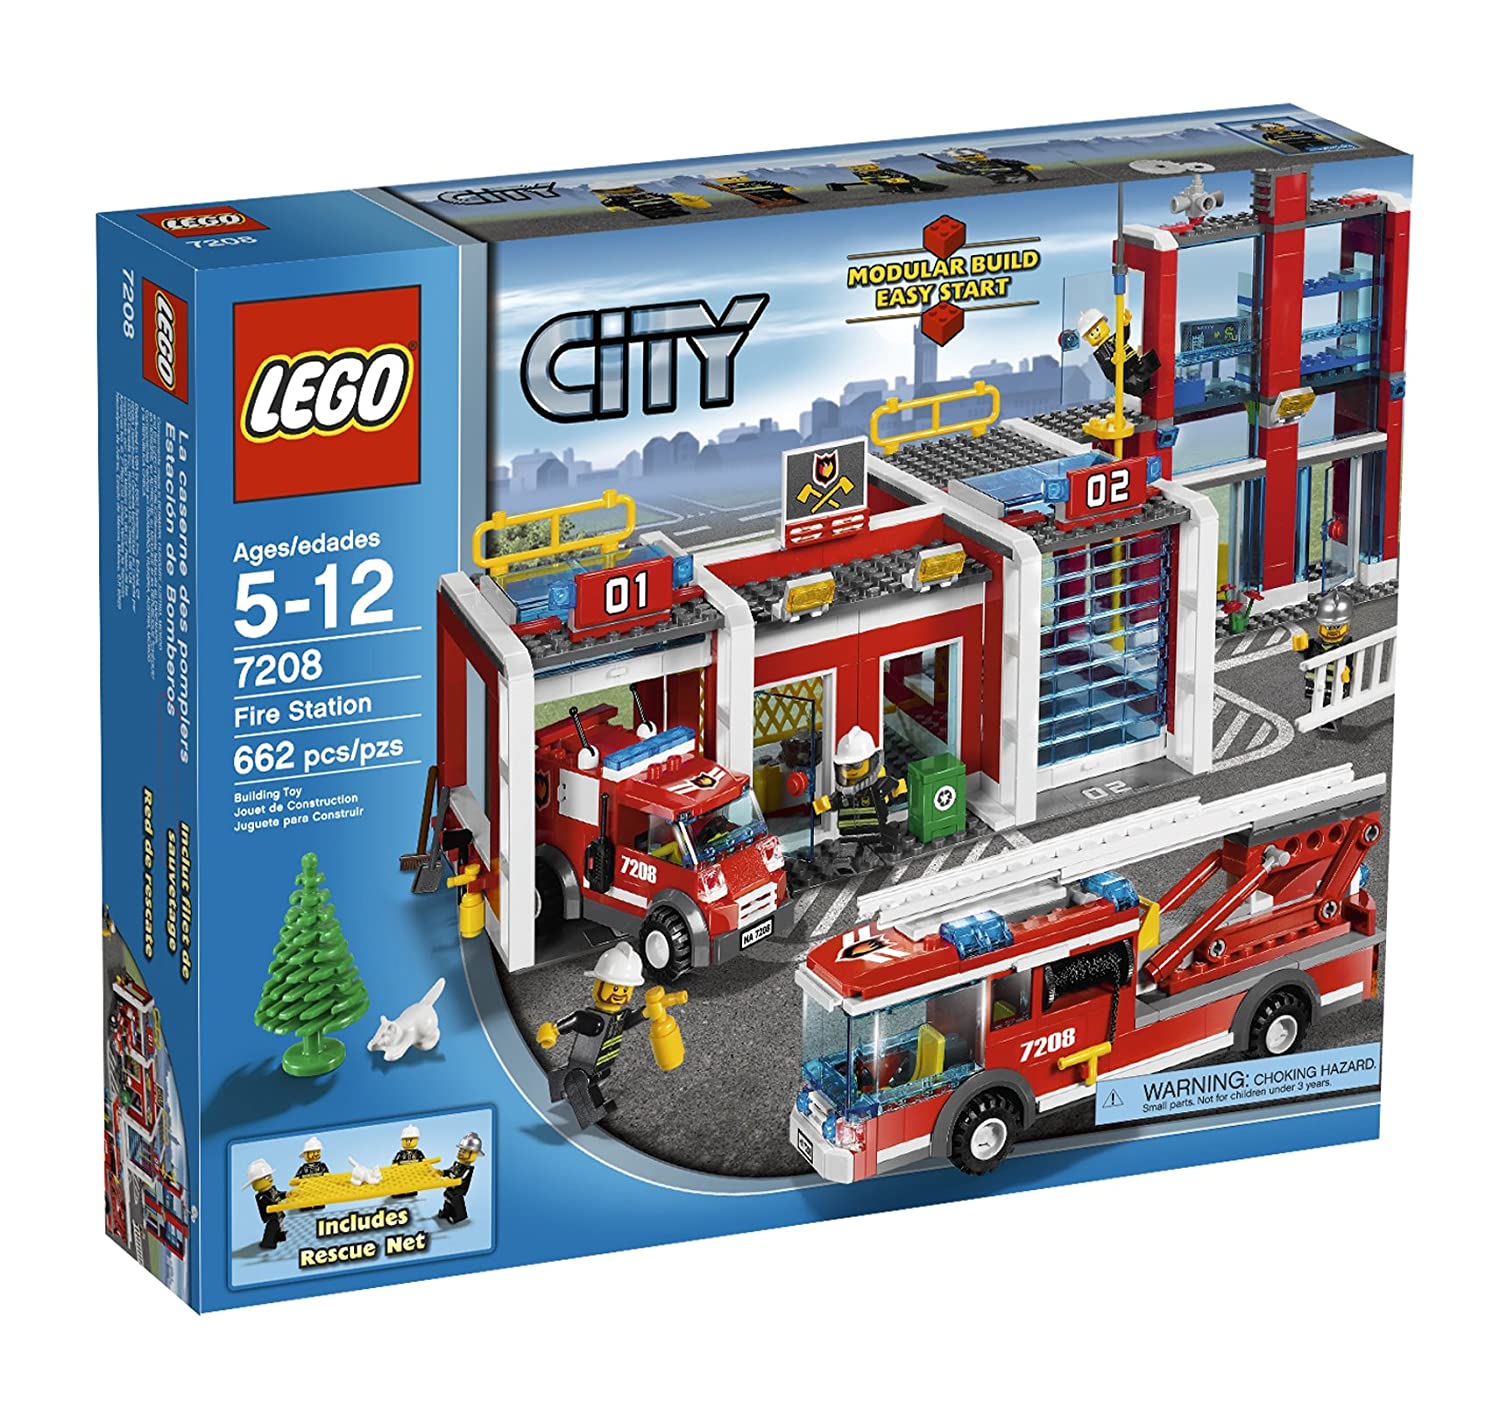 9 Best LEGO Fire Station Sets 2022 - Buying Guide 7